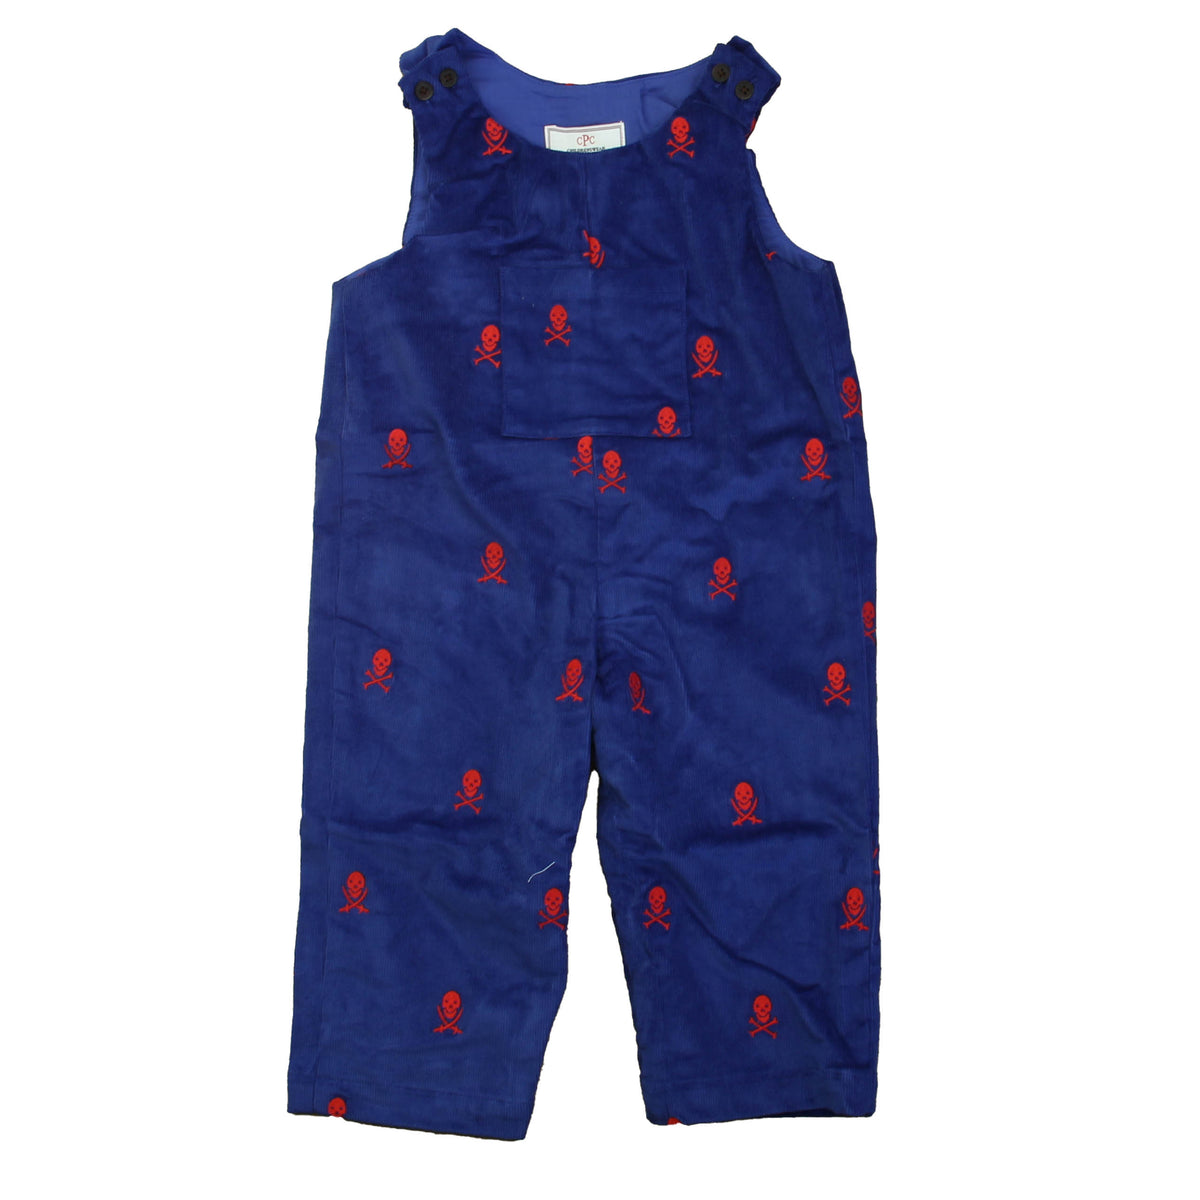 New with Tags: Bright Navy with Skull &amp; Cross Bones Pants -- FINAL SALE